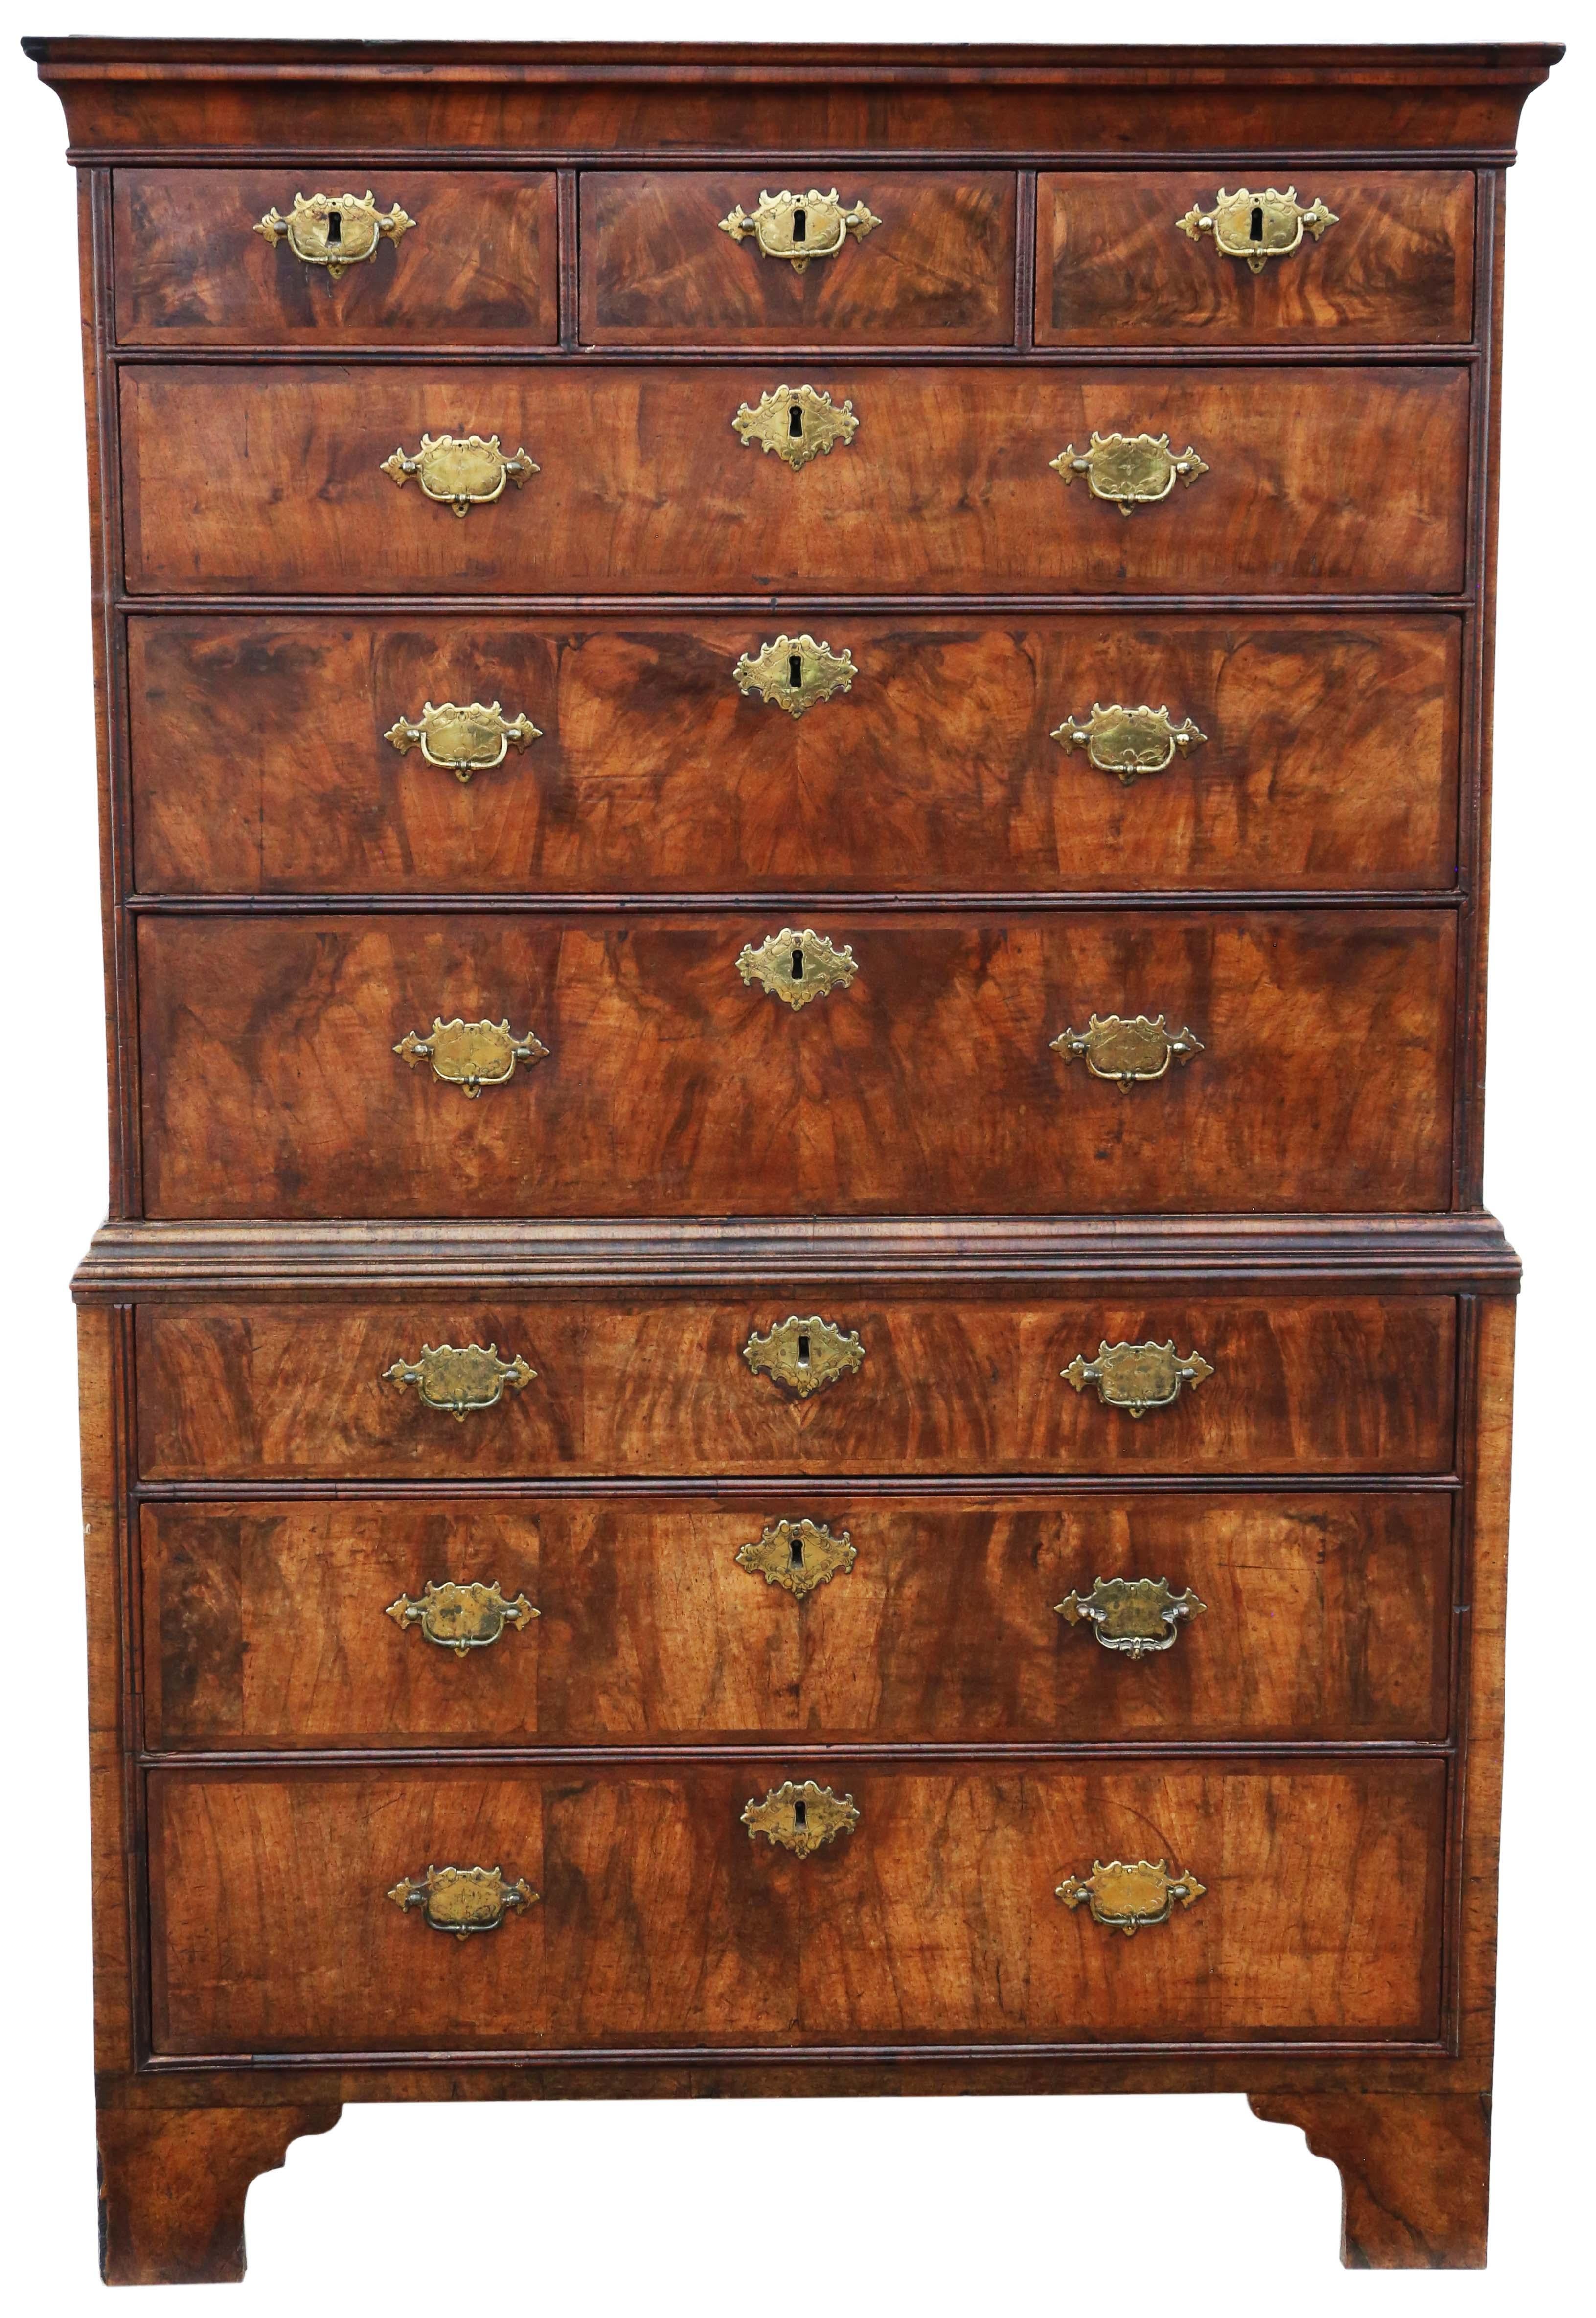 Antique fine quality 18th Century burr figured walnut tallboy chest on chest of drawers.
This is a lovely chest with a lovely age, charachter and charm. Attractive walnut veneers.

Splits into two halves for transport.

No loose joints and the oak